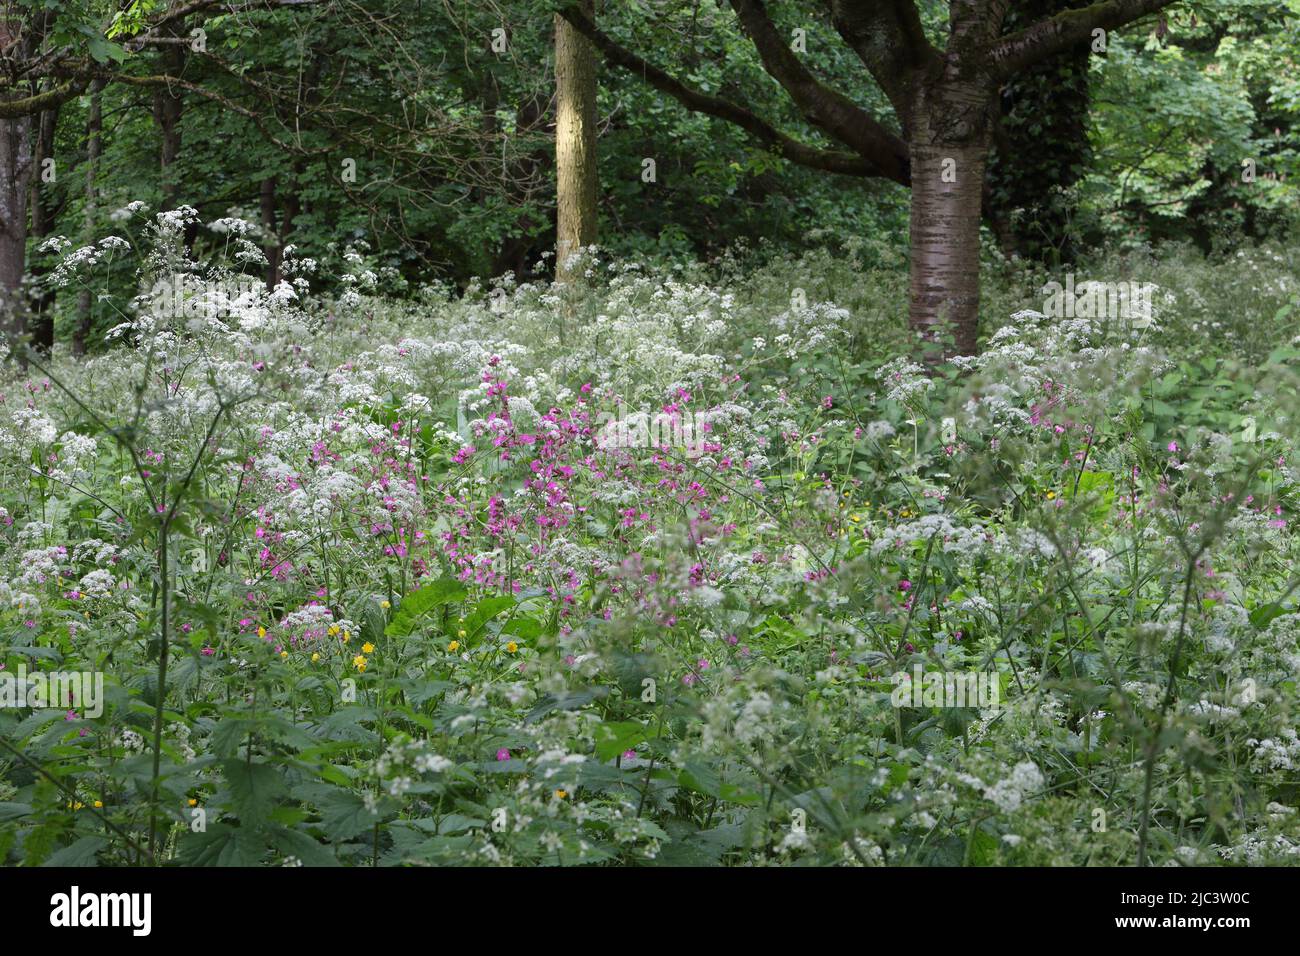 Area of woodland undergrowth, growing wild, with wild flowers plants Stock Photo